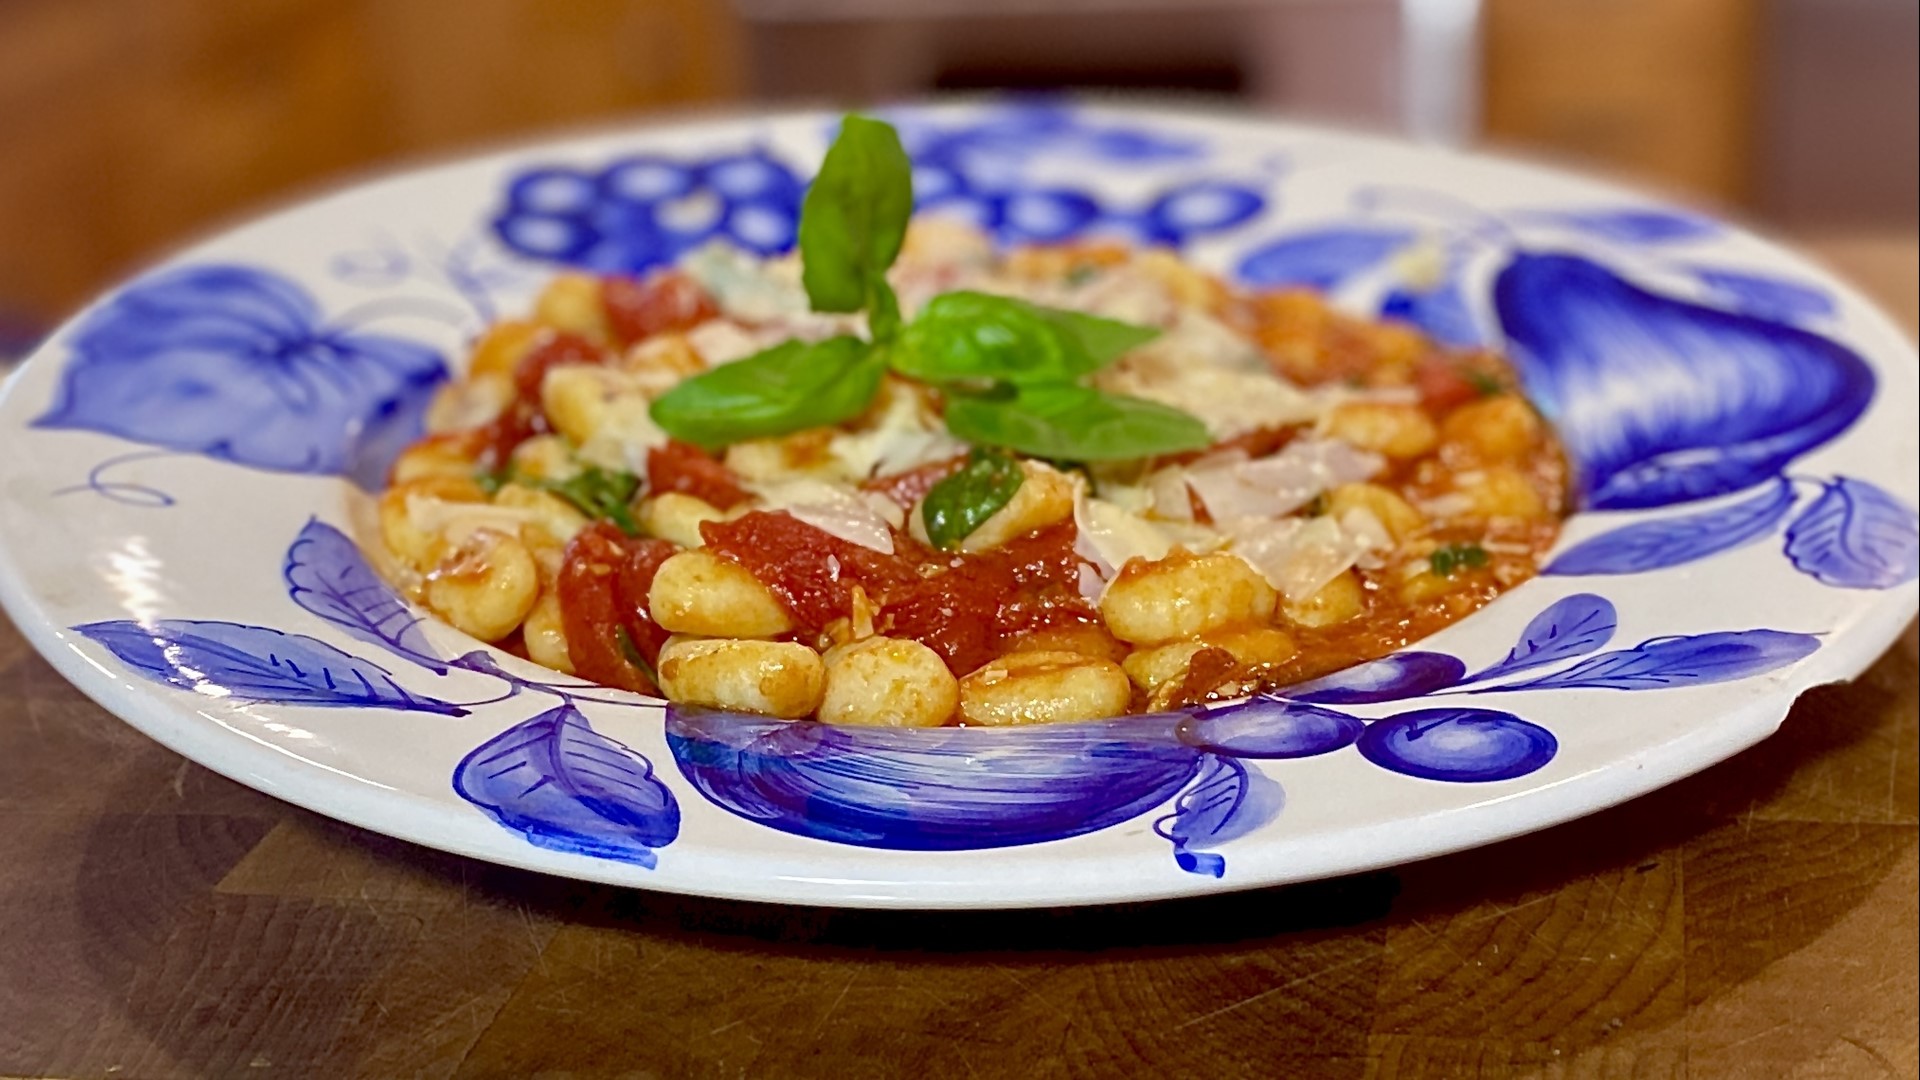 You can use my homemade Gnocchi recipe if you want to go there and make your own, but a store-bought version is also a good option.